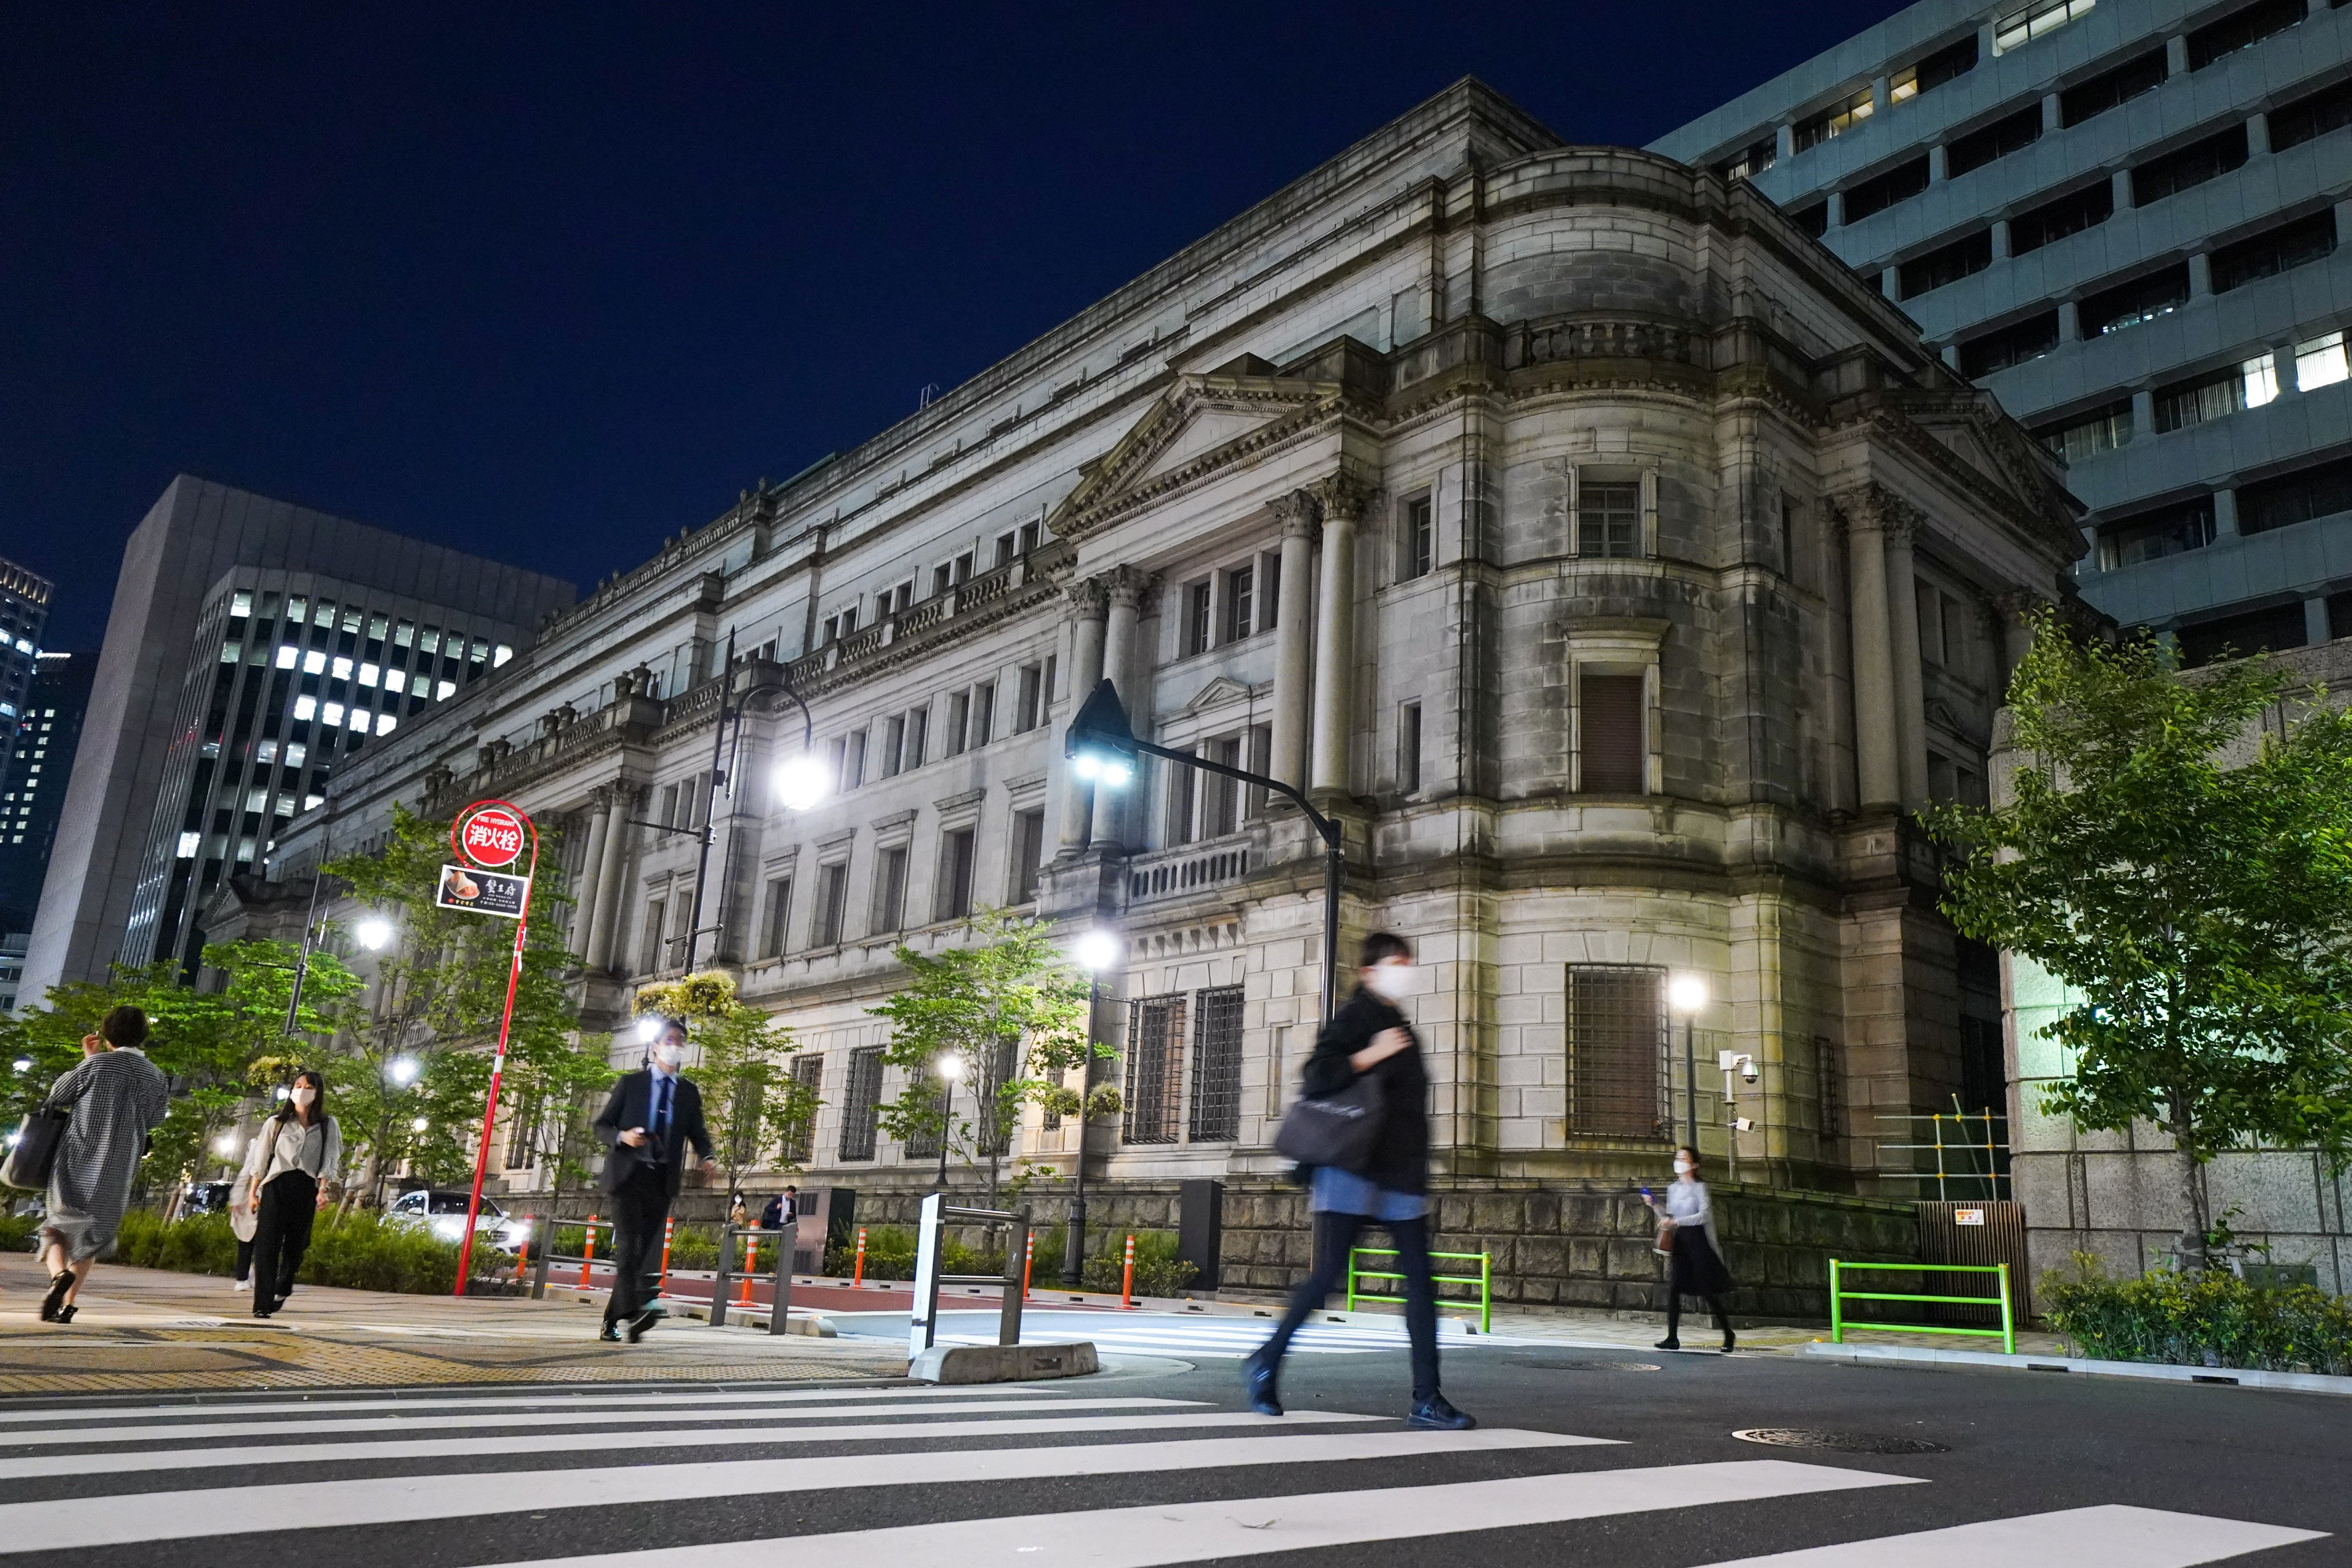 The Bank of Japan (BOJ) headquarters in Tokyo, Japan. Changing interest rates and government stimulus packages are likely to play a key part in reshaping the post-pandemic economic order. Photo: Bloomberg